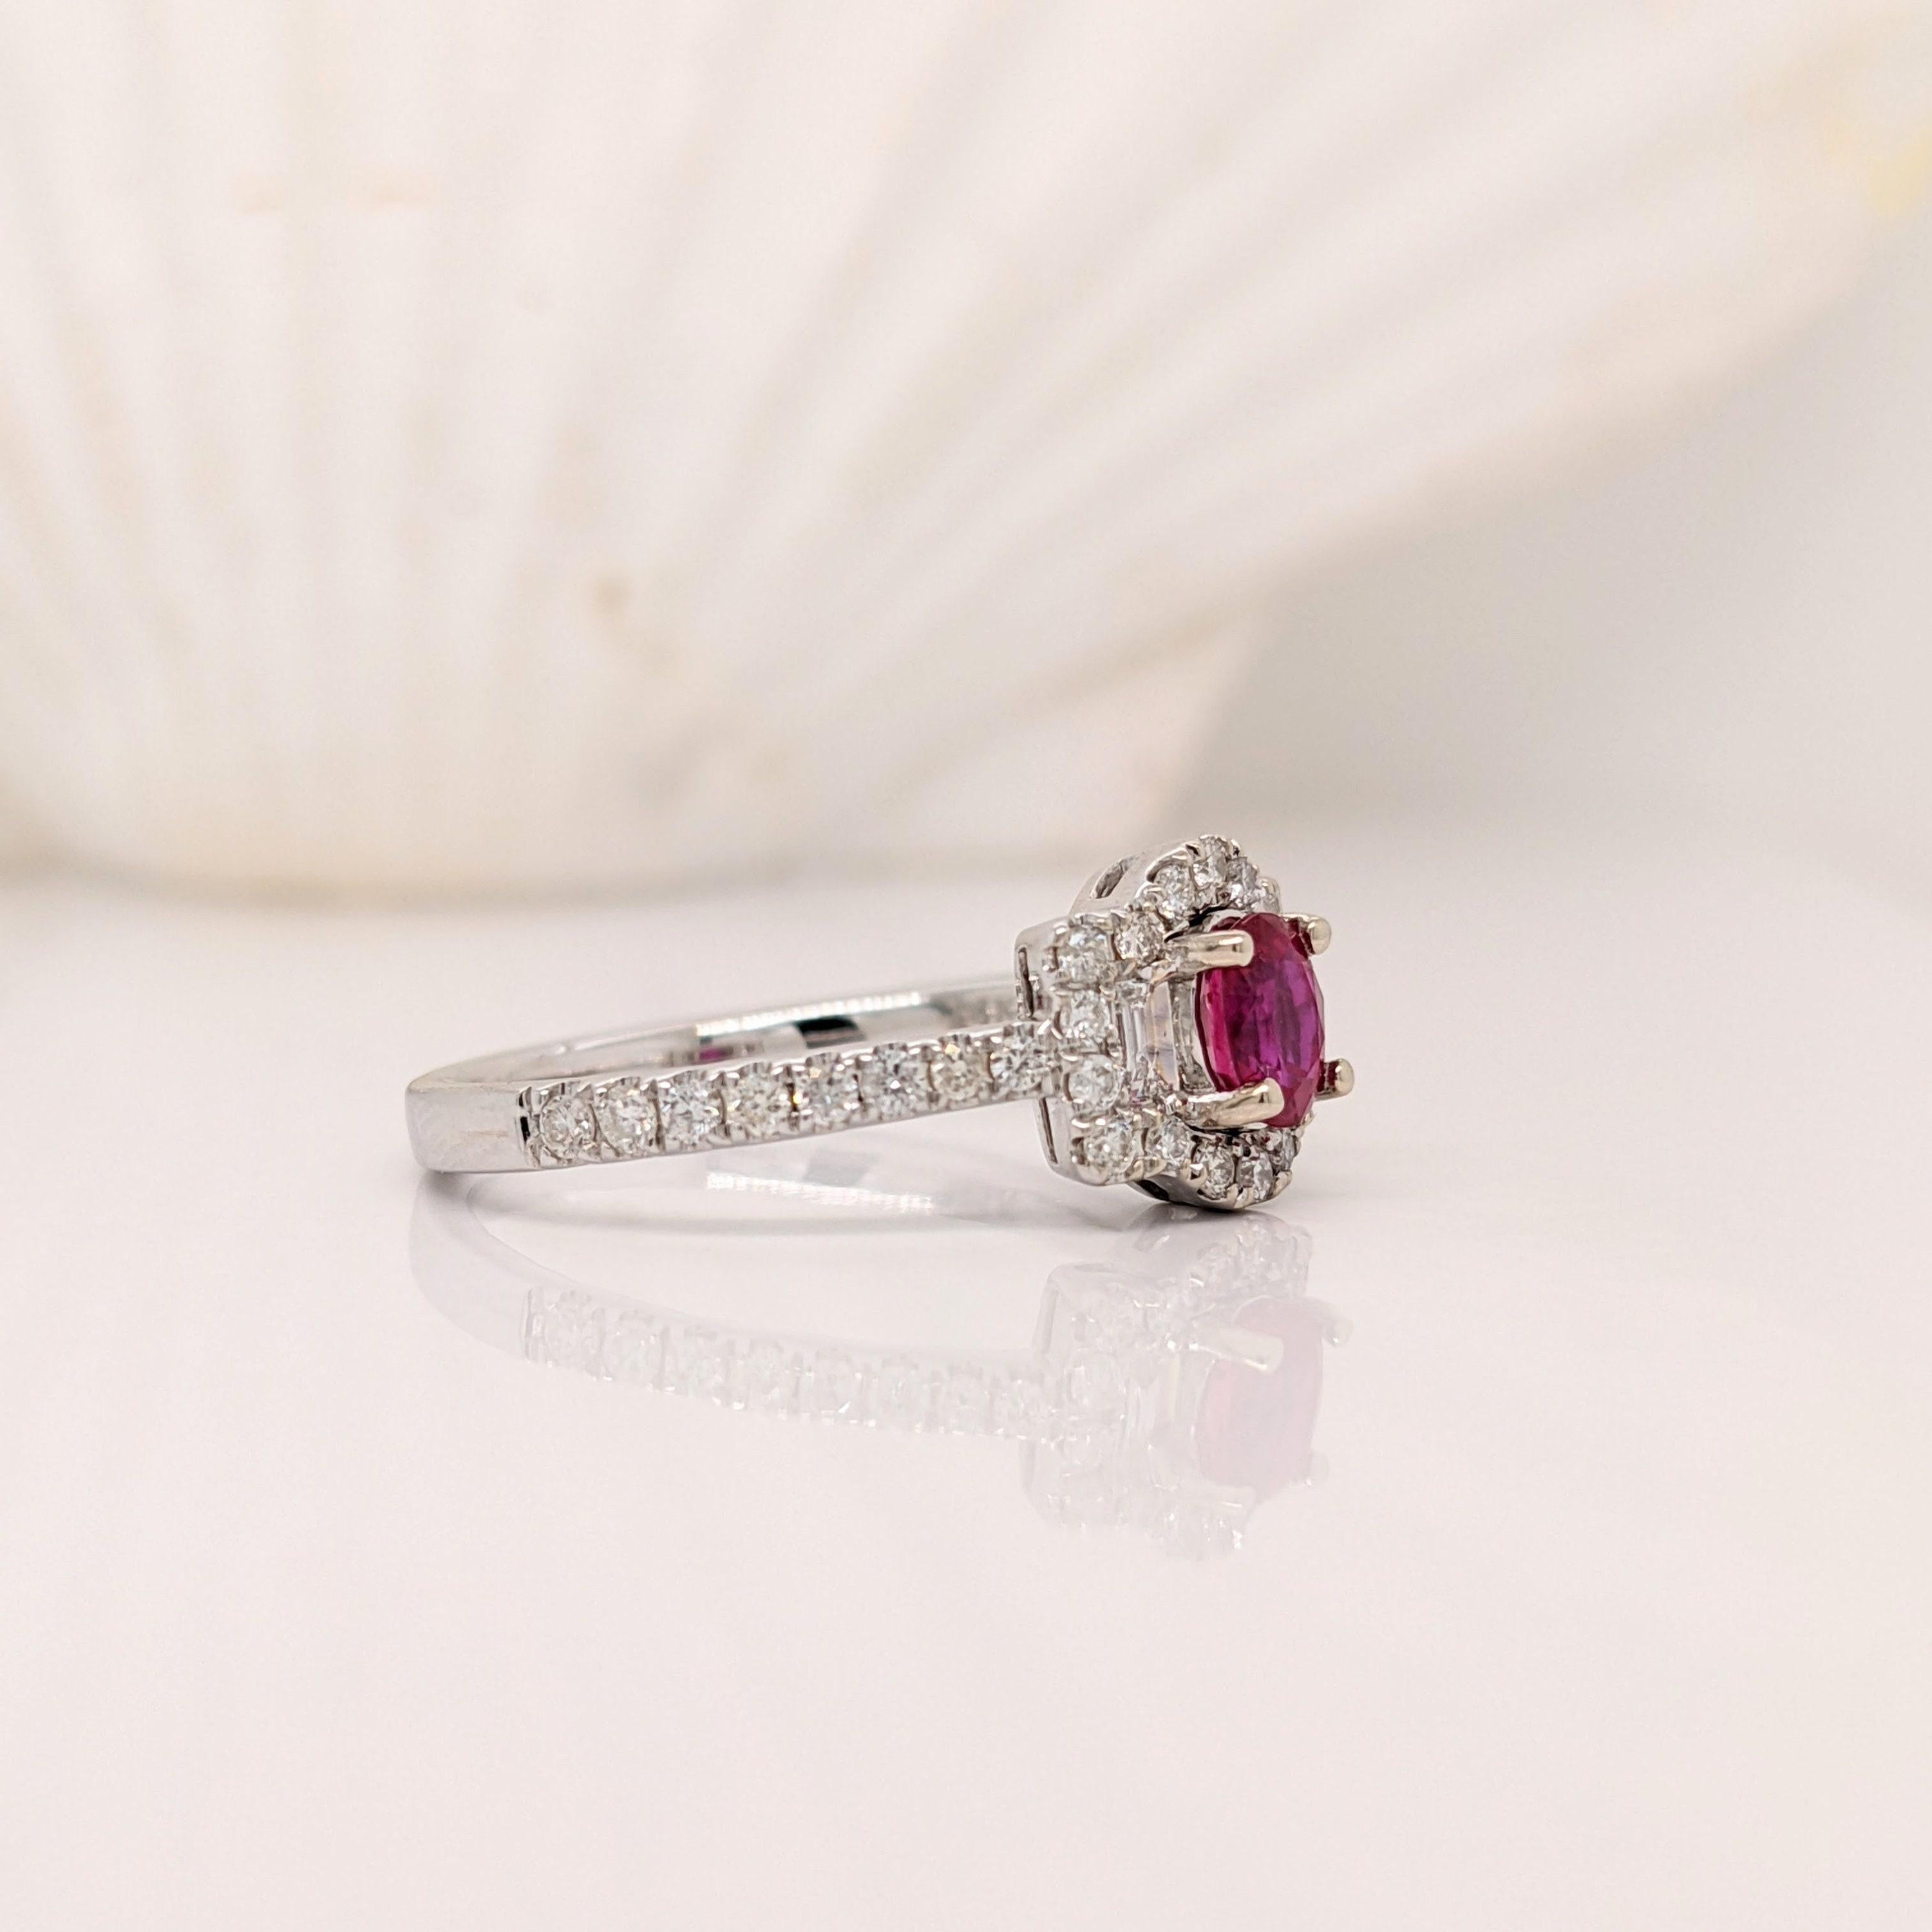 This gorgeous cherry red ruby comes from Mozambique and looks stunning in a classic NNJ Design's semi mount with baguette diamond accents and a pave diamond halo and shank.  A polished design that looks good on anyone! Pair this gorgeous ruby with